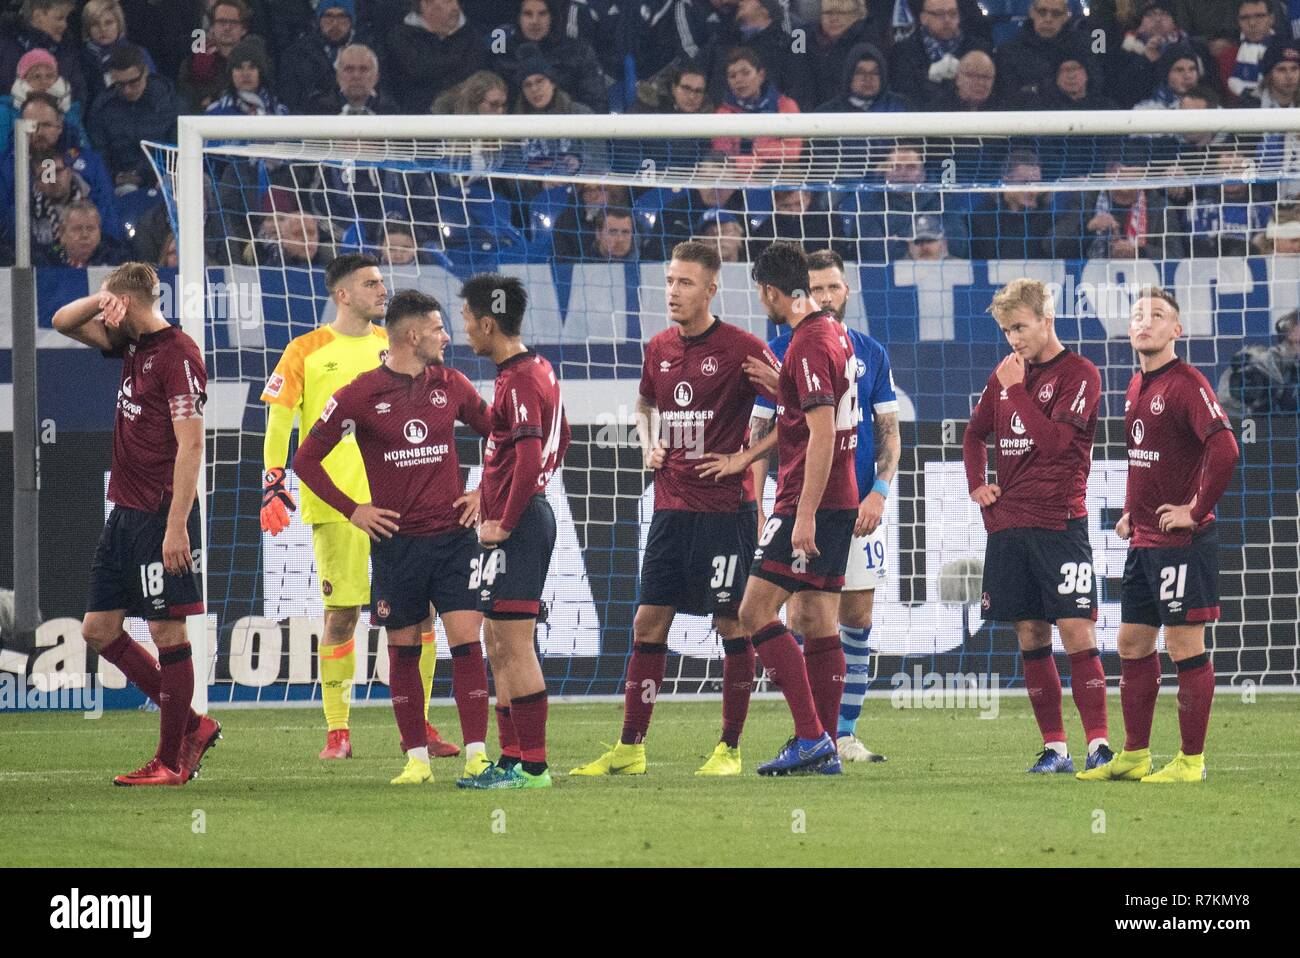 Gelsenkirchen, Deutschland. 24th Nov, 2018. FC Nuremberg players clueless and frustrated (left to right): Hanno BEHRENS (N), goalkeeper Fabian BREDLOW (N), Tim LEIBOLD (N), Yuya KUBO (N), Ondrej PETRAK (N), Simon RHEIN (N), Federico PALACIOS (N) and in between Guido BURGSTALLER (GE, 3rd from right); Soccer 1. Bundesliga, 12th matchday, FC Schalke 04 (GER) - FC Nuremberg (N) 5: 2, on 24/11/2018 in Gelsenkirchen/Germany. DFL regulations prohibit any use of images as image sequences and/or quasi-video | usage worldwide Credit: dpa/Alamy Live News Stock Photo